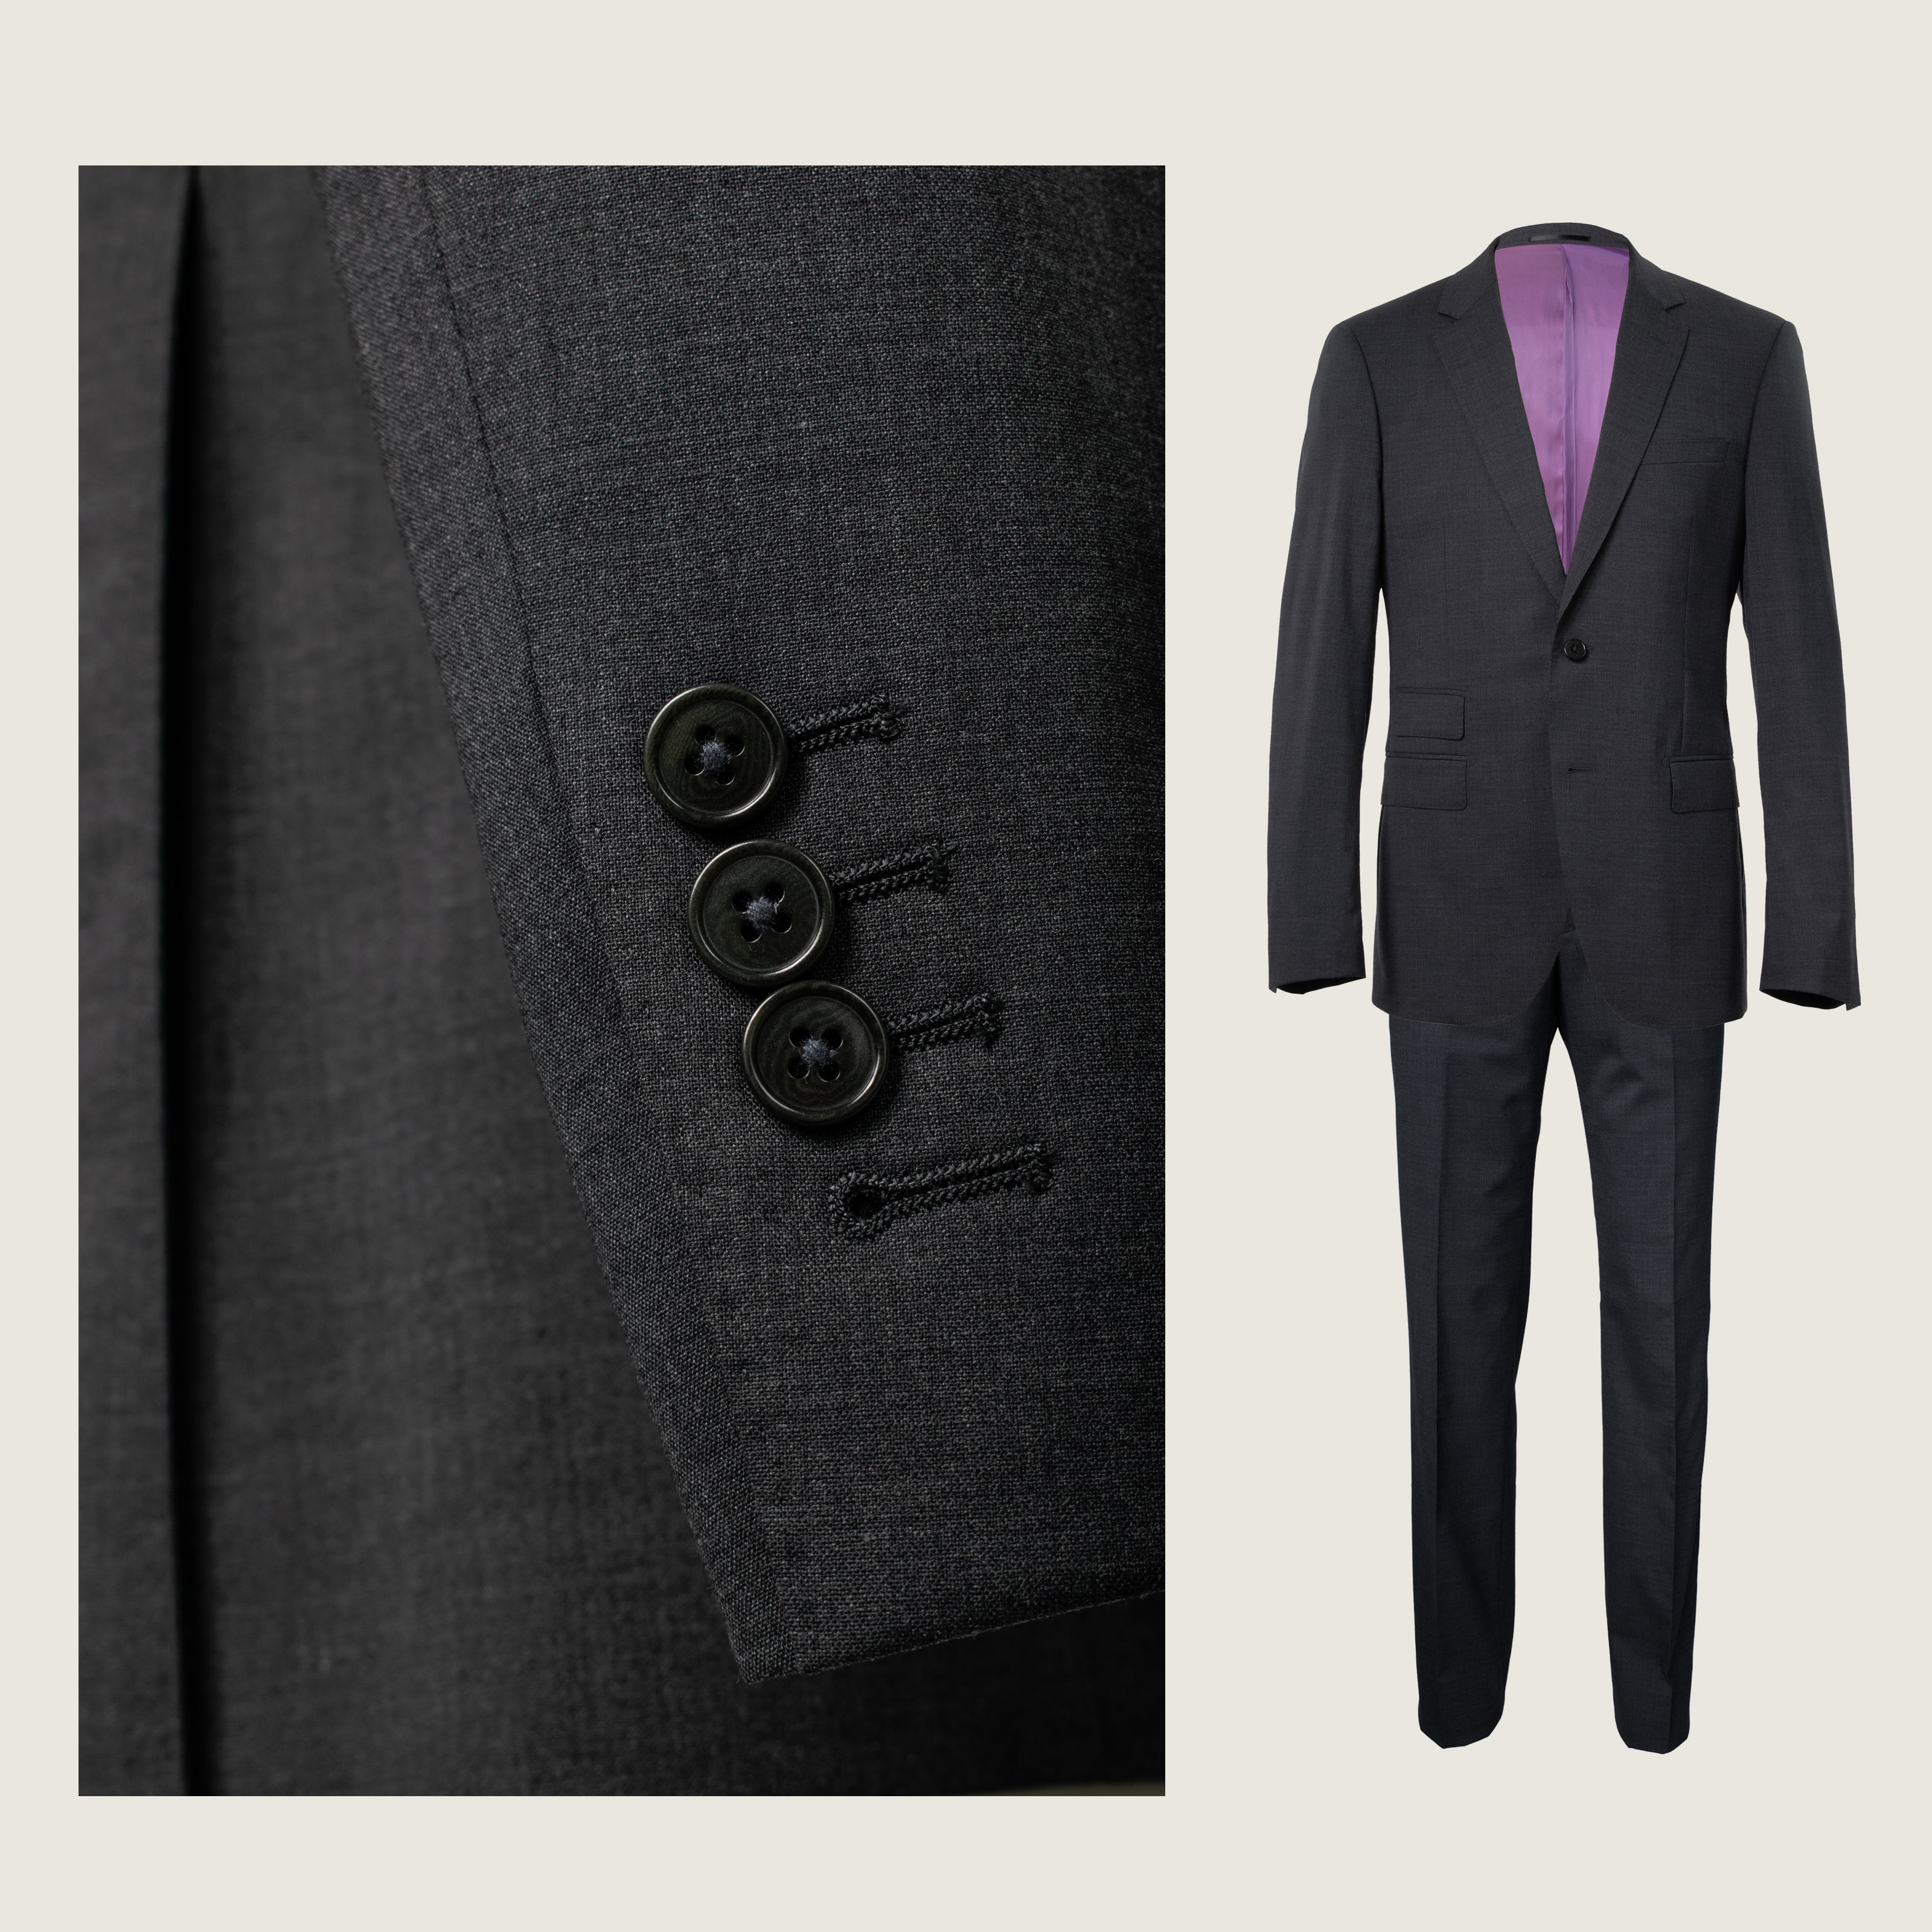 Essential Charcoal Suit